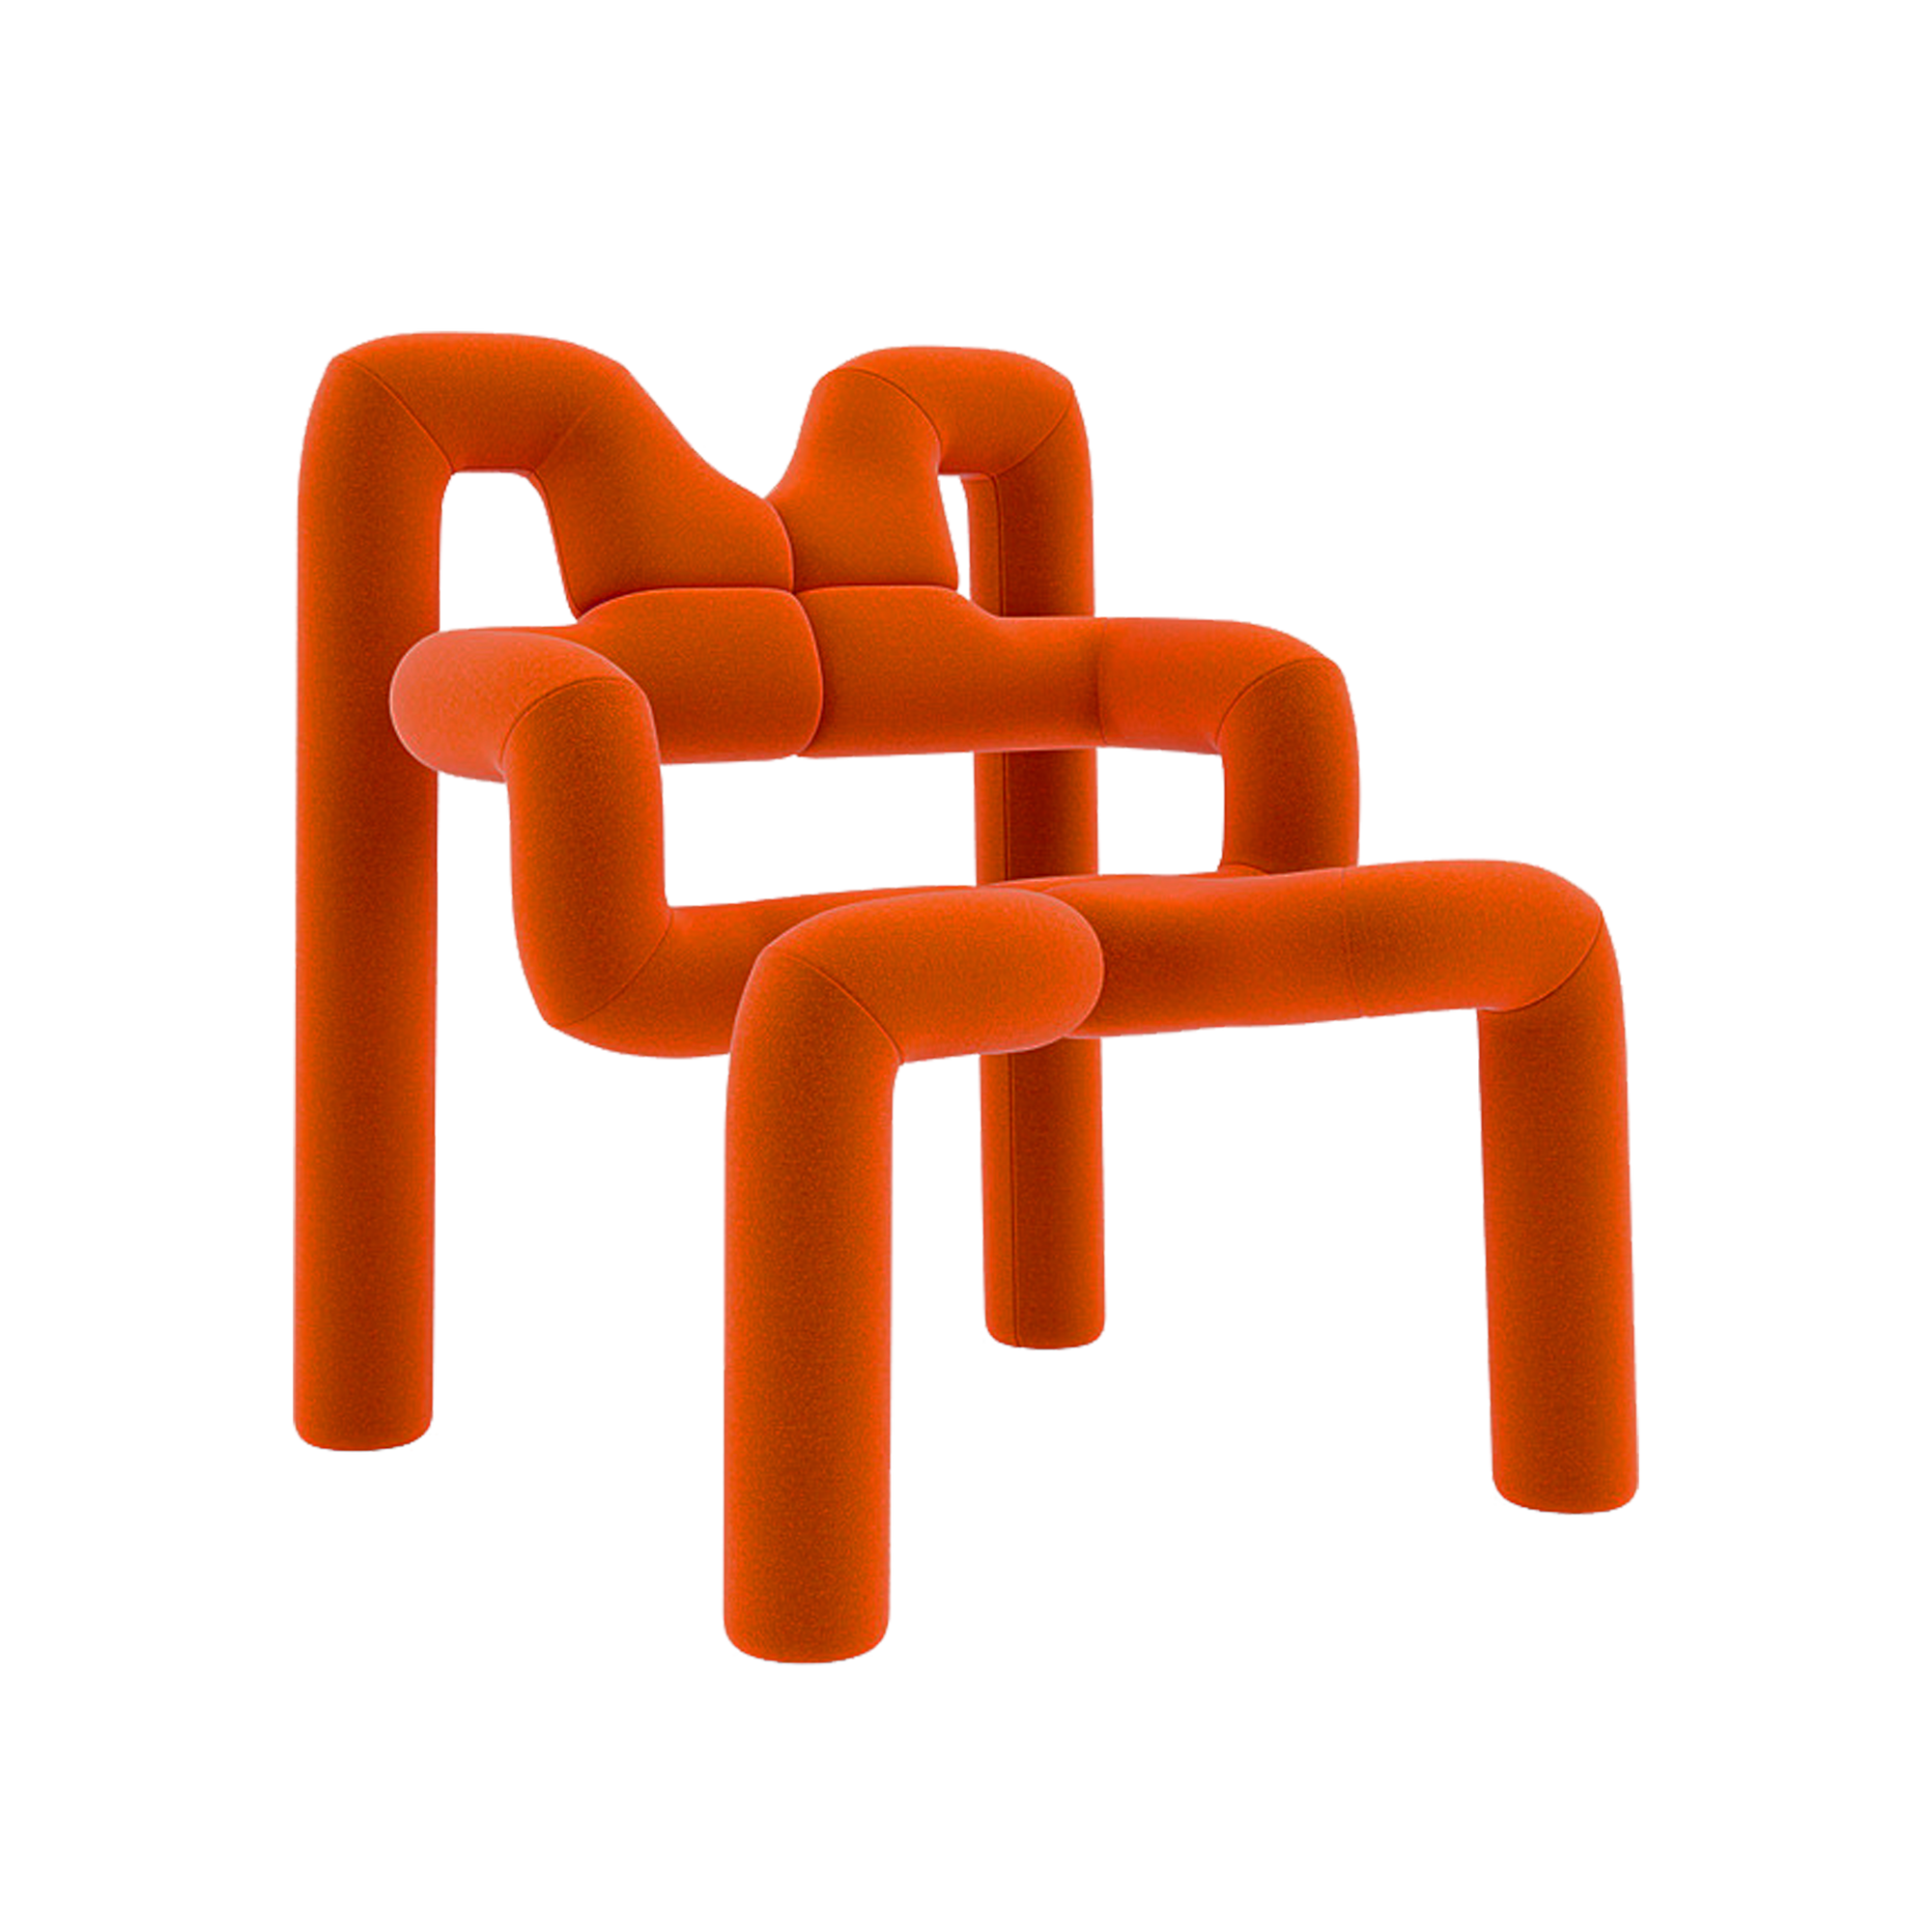 Designed by Terje Ekstrøm in 1984, the Ekstrem Chair is not merely a chair, but rather a stand-alone object.